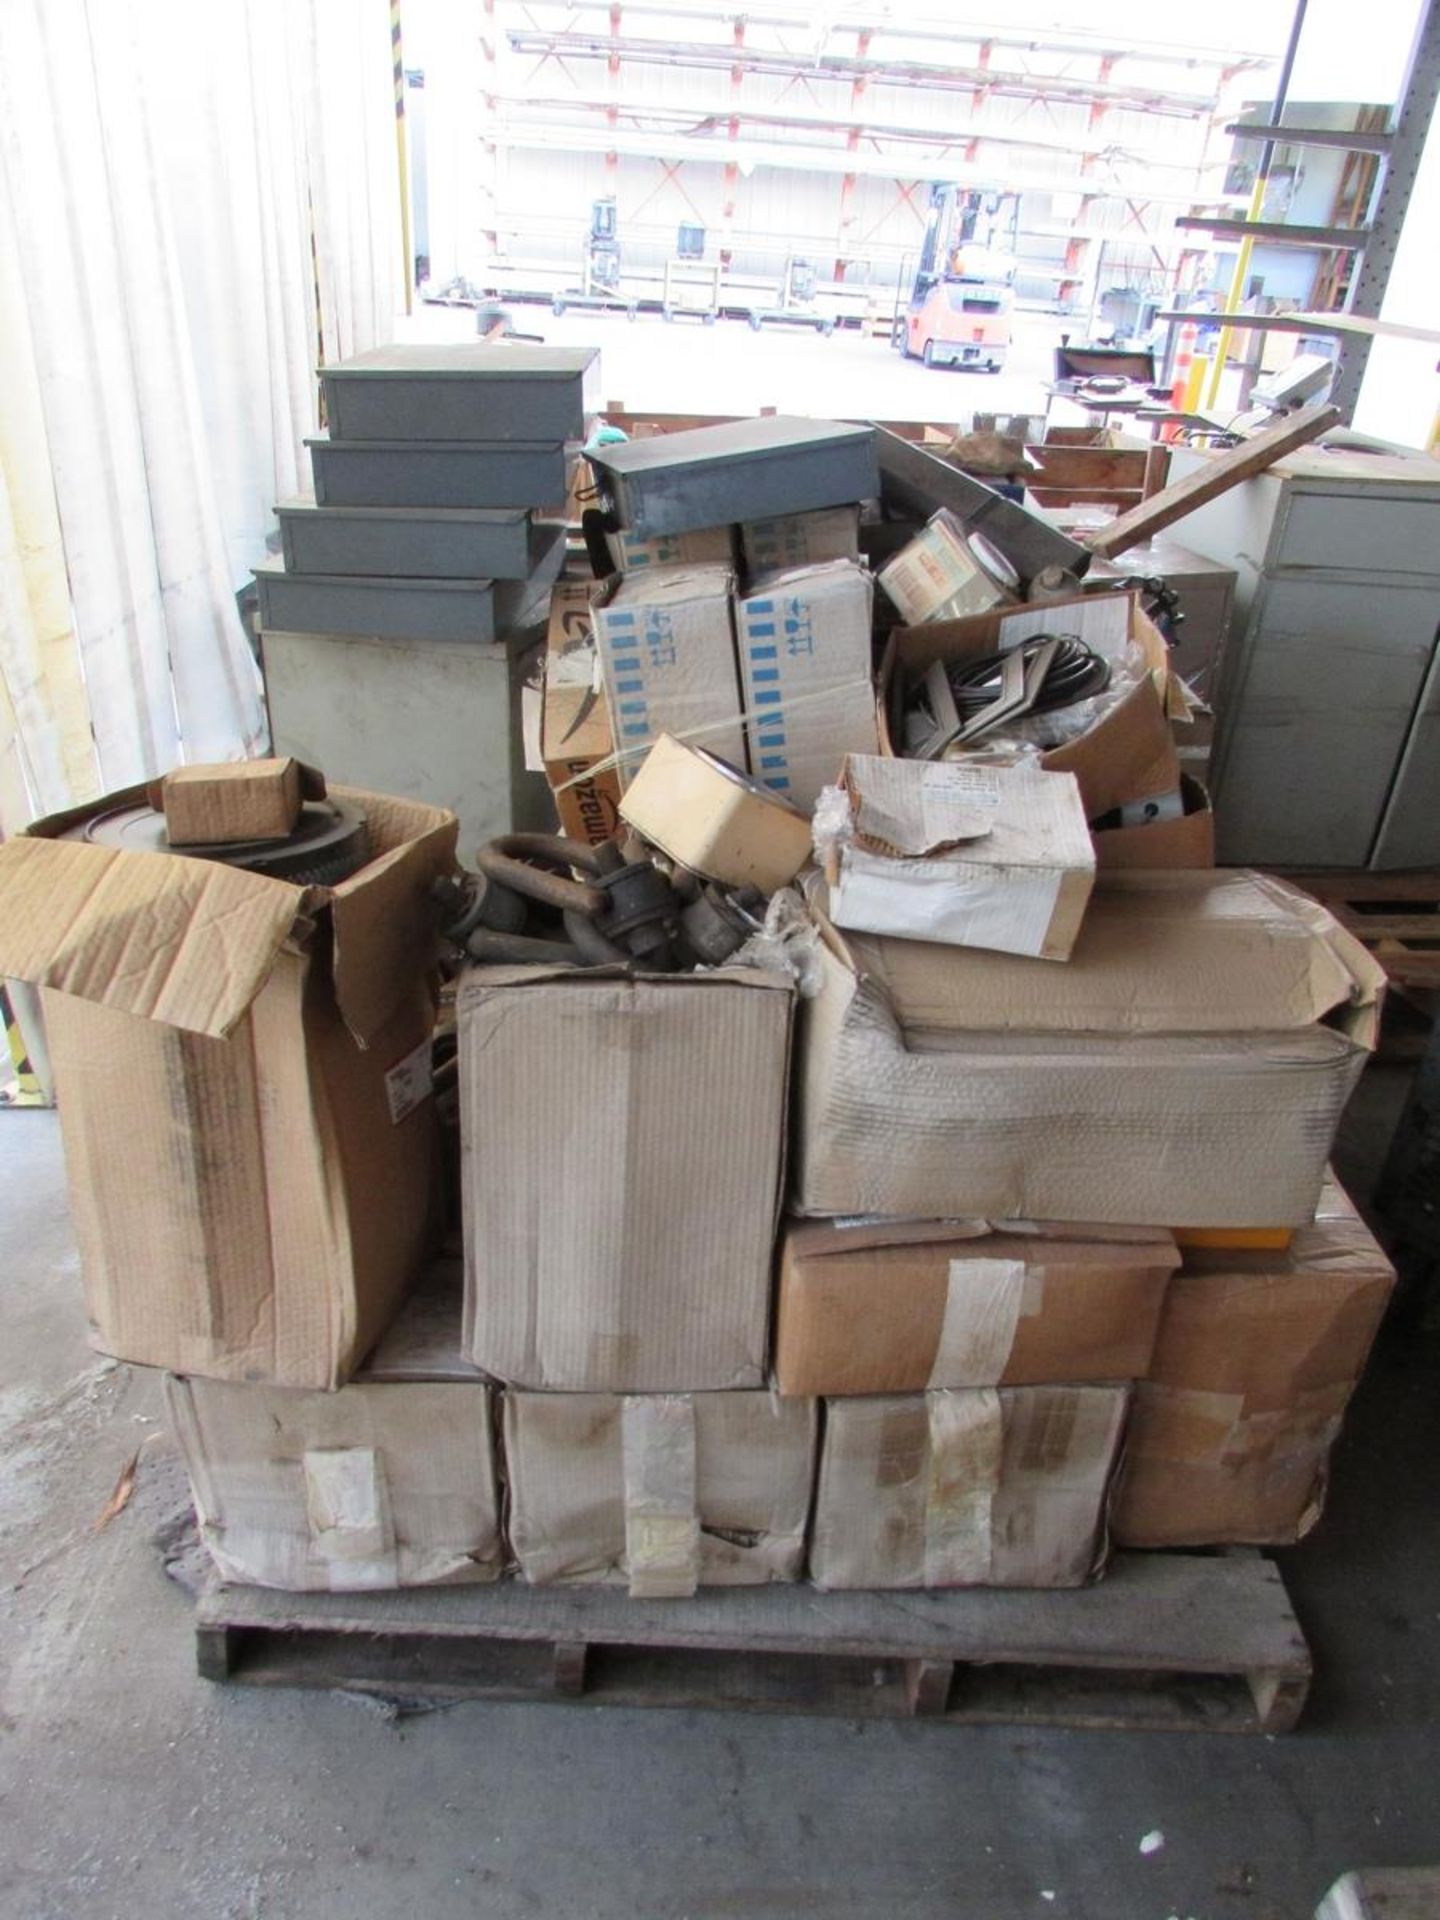 LOT - (10) PALLETS OF ASSORTED SPARE PARTS, TO INCLUDE: MOTORS, SERVOS, PUMPS, MISC. PARTS, ETC. - Image 16 of 21